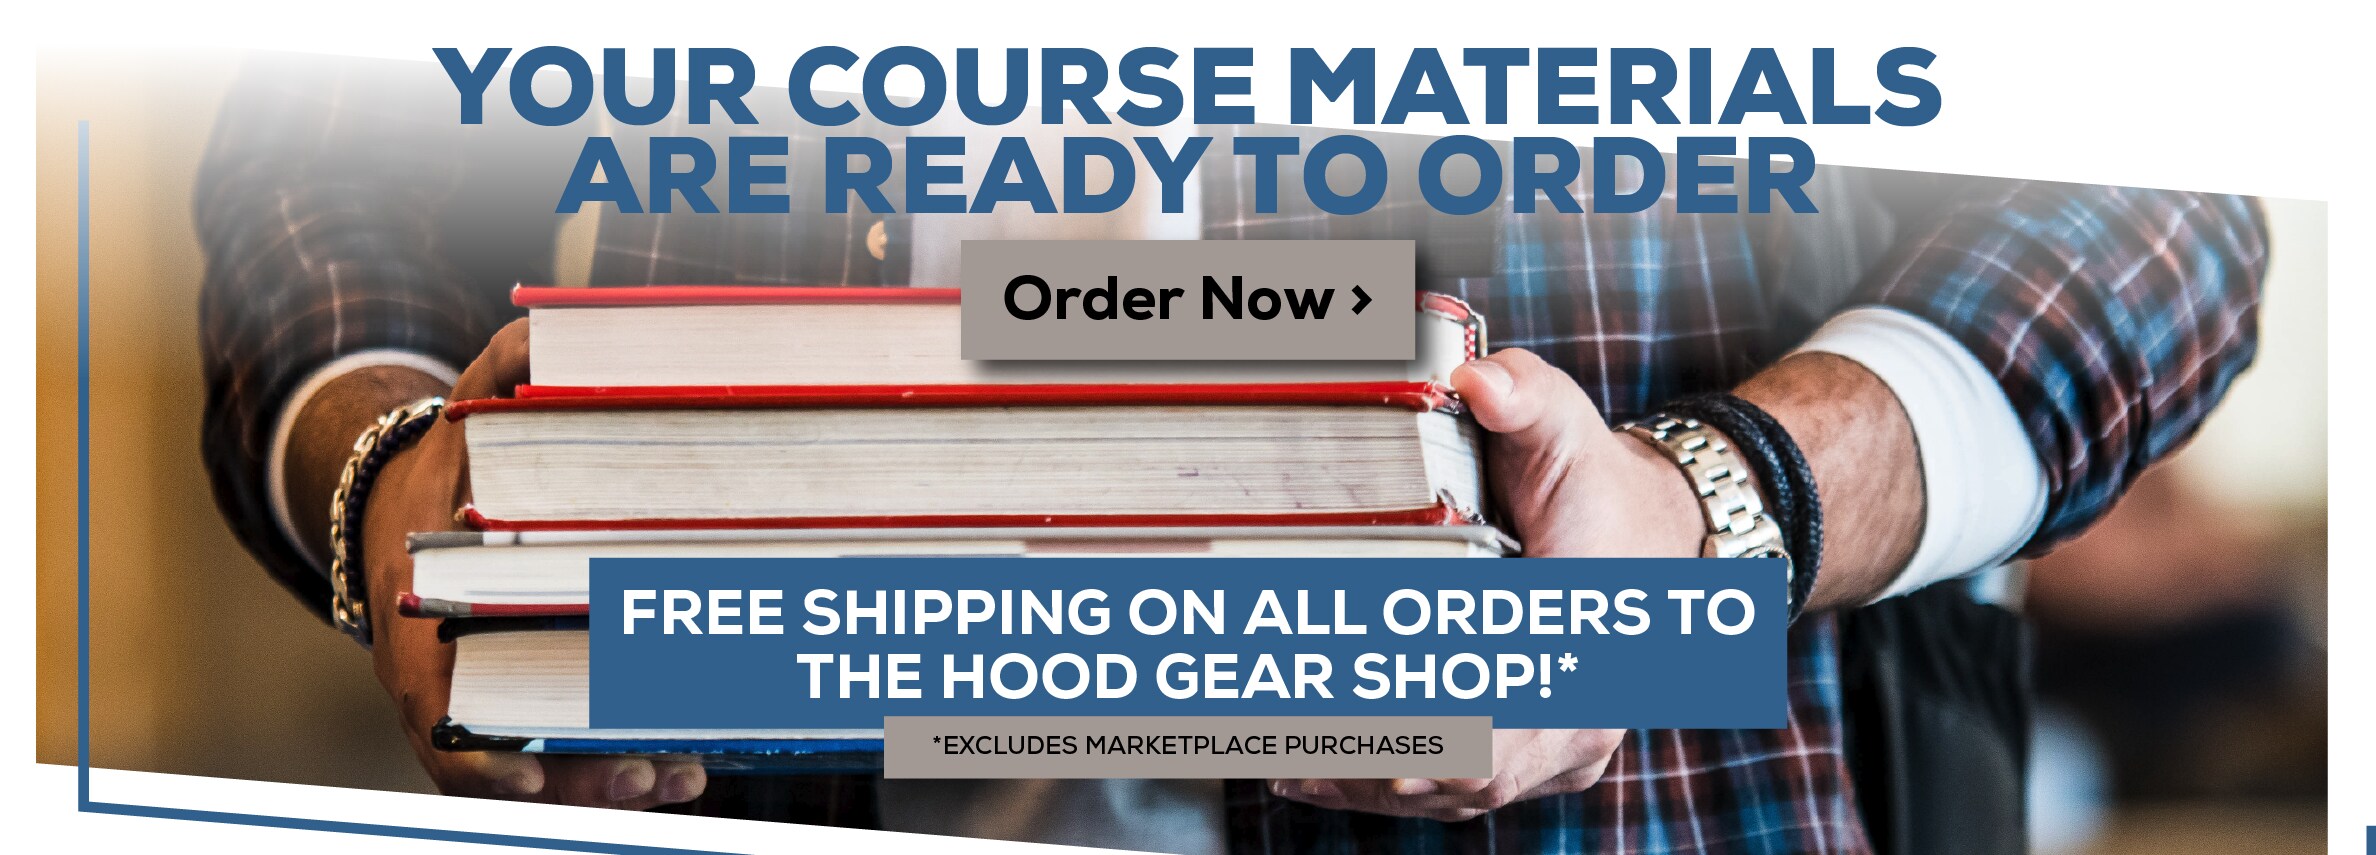 Your Course Materials are Ready to Order. Order Now. Free shipping on orders to the Hood Gear shop! *Excludes marketplace purchases.